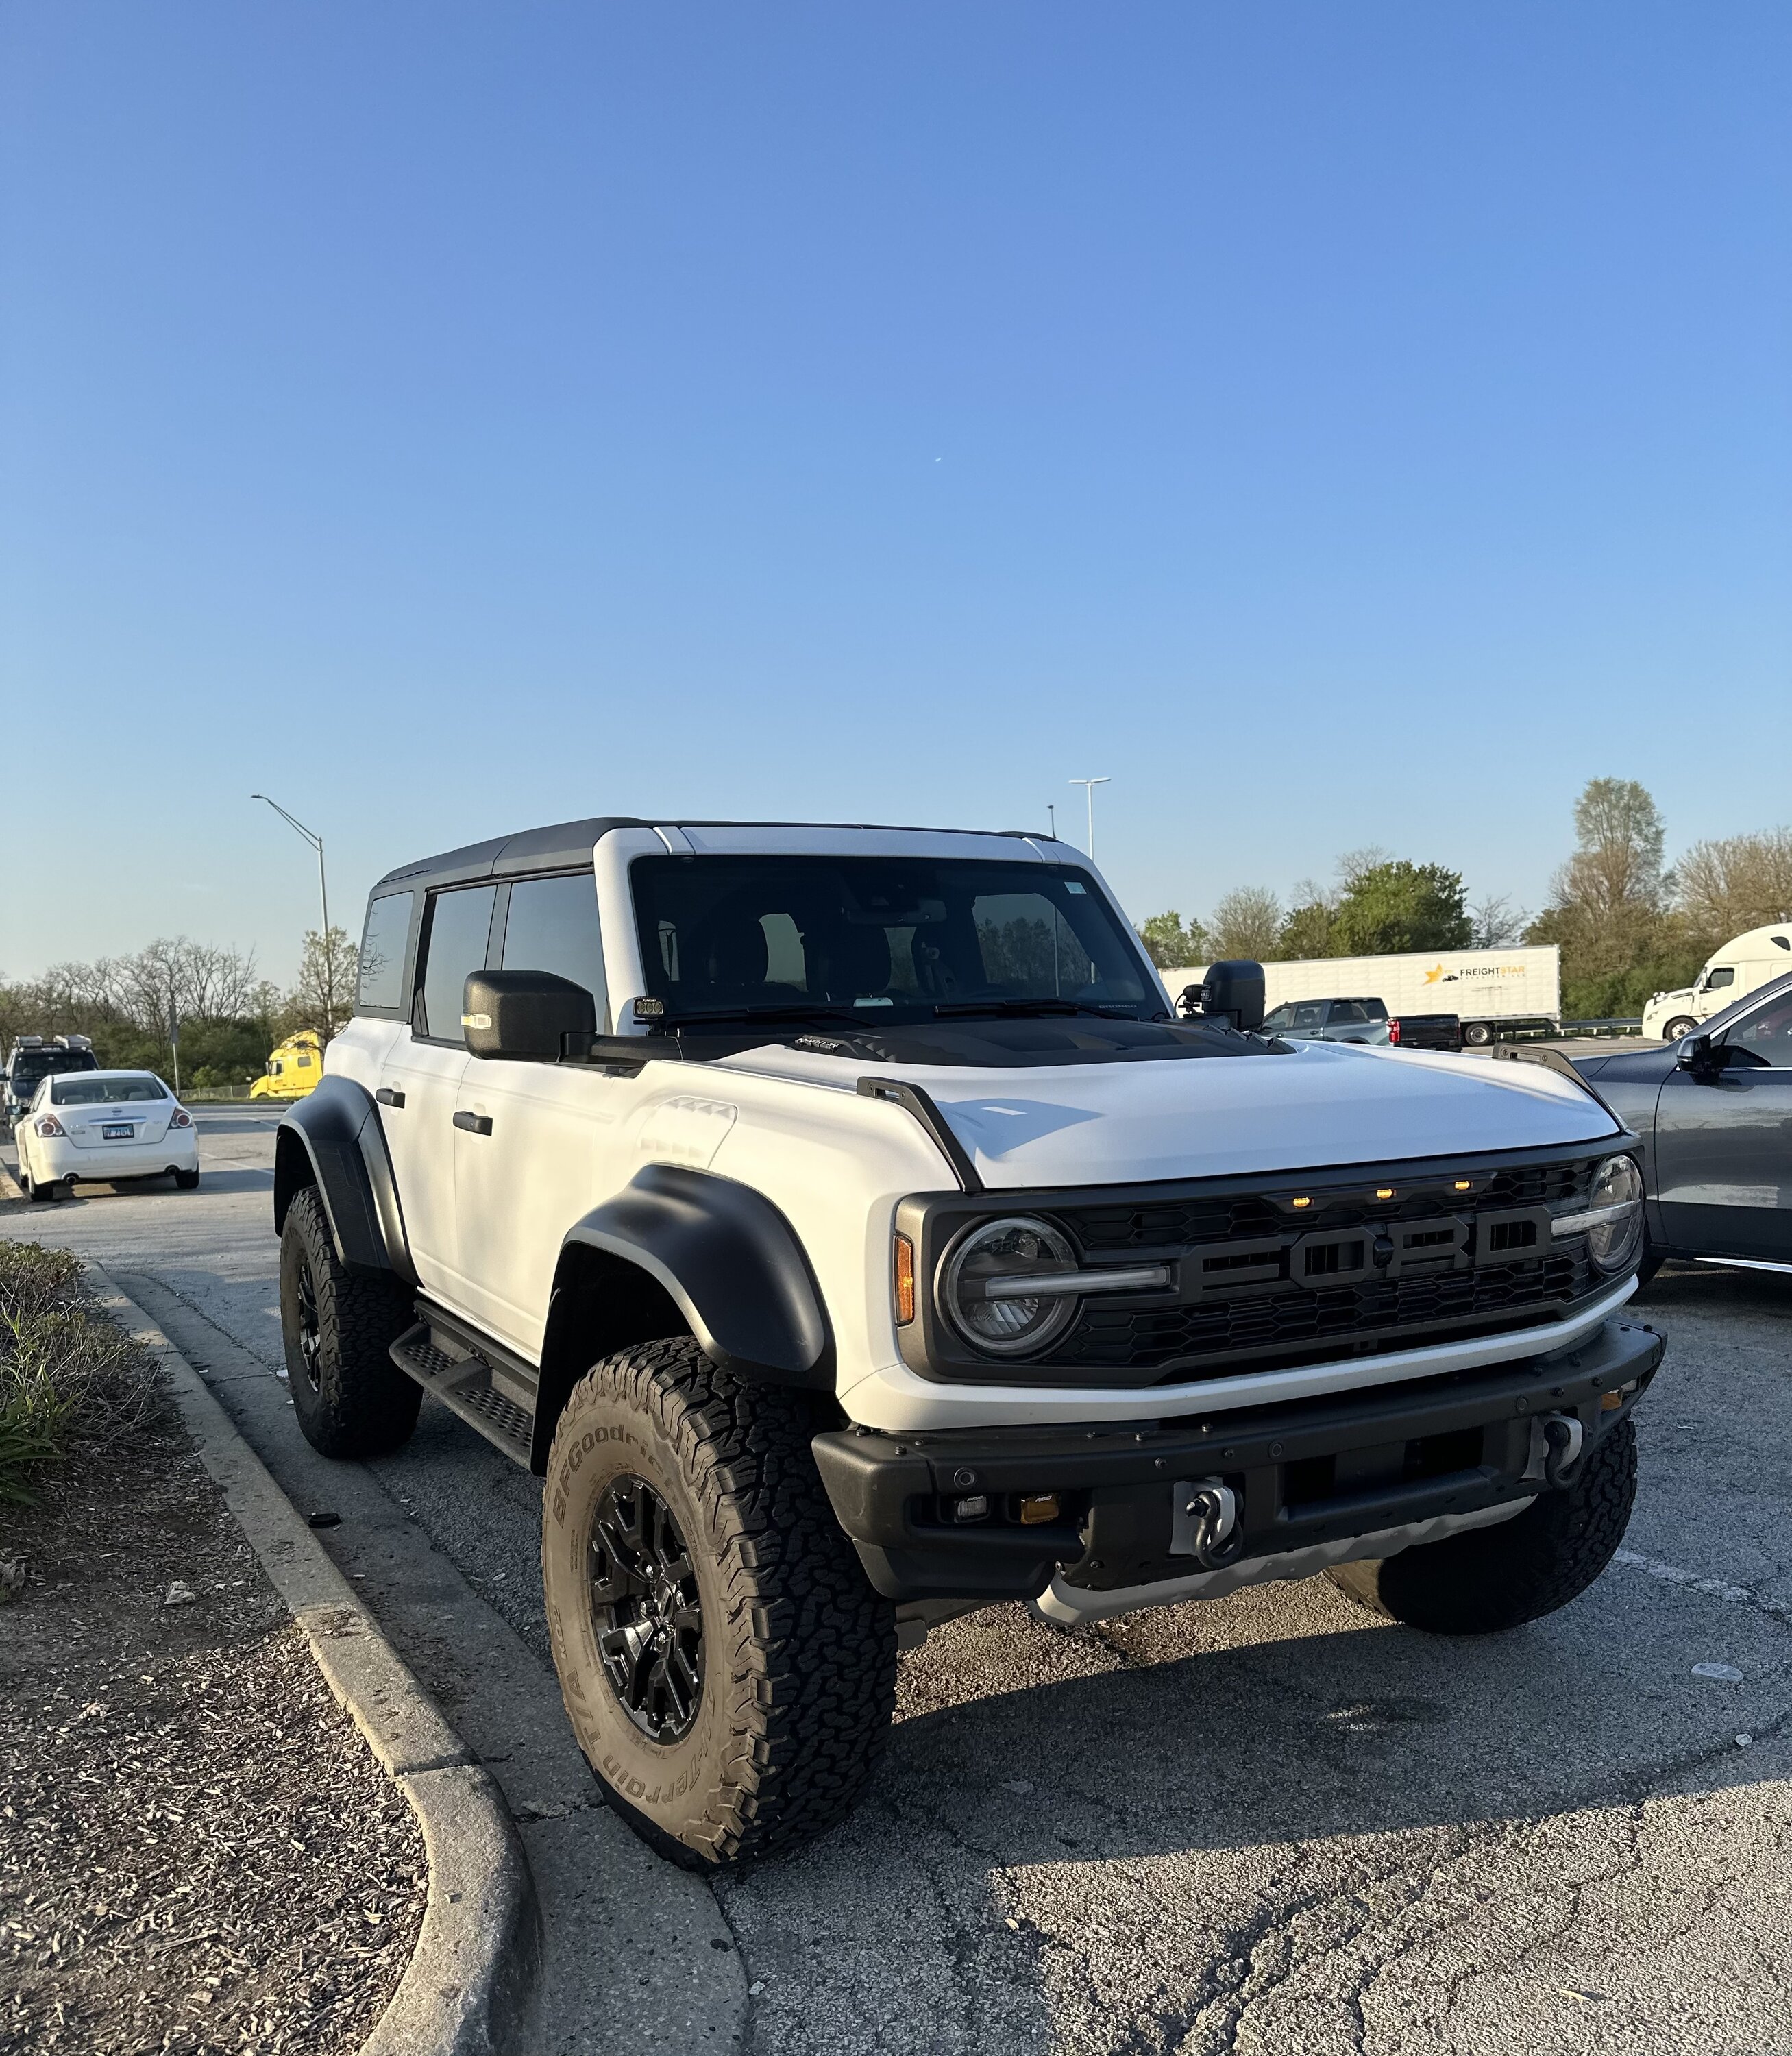 Ford Bronco XPEL Stealth PPF Wrap Completed on Bronco Raptor in Oxford White IMG_4591